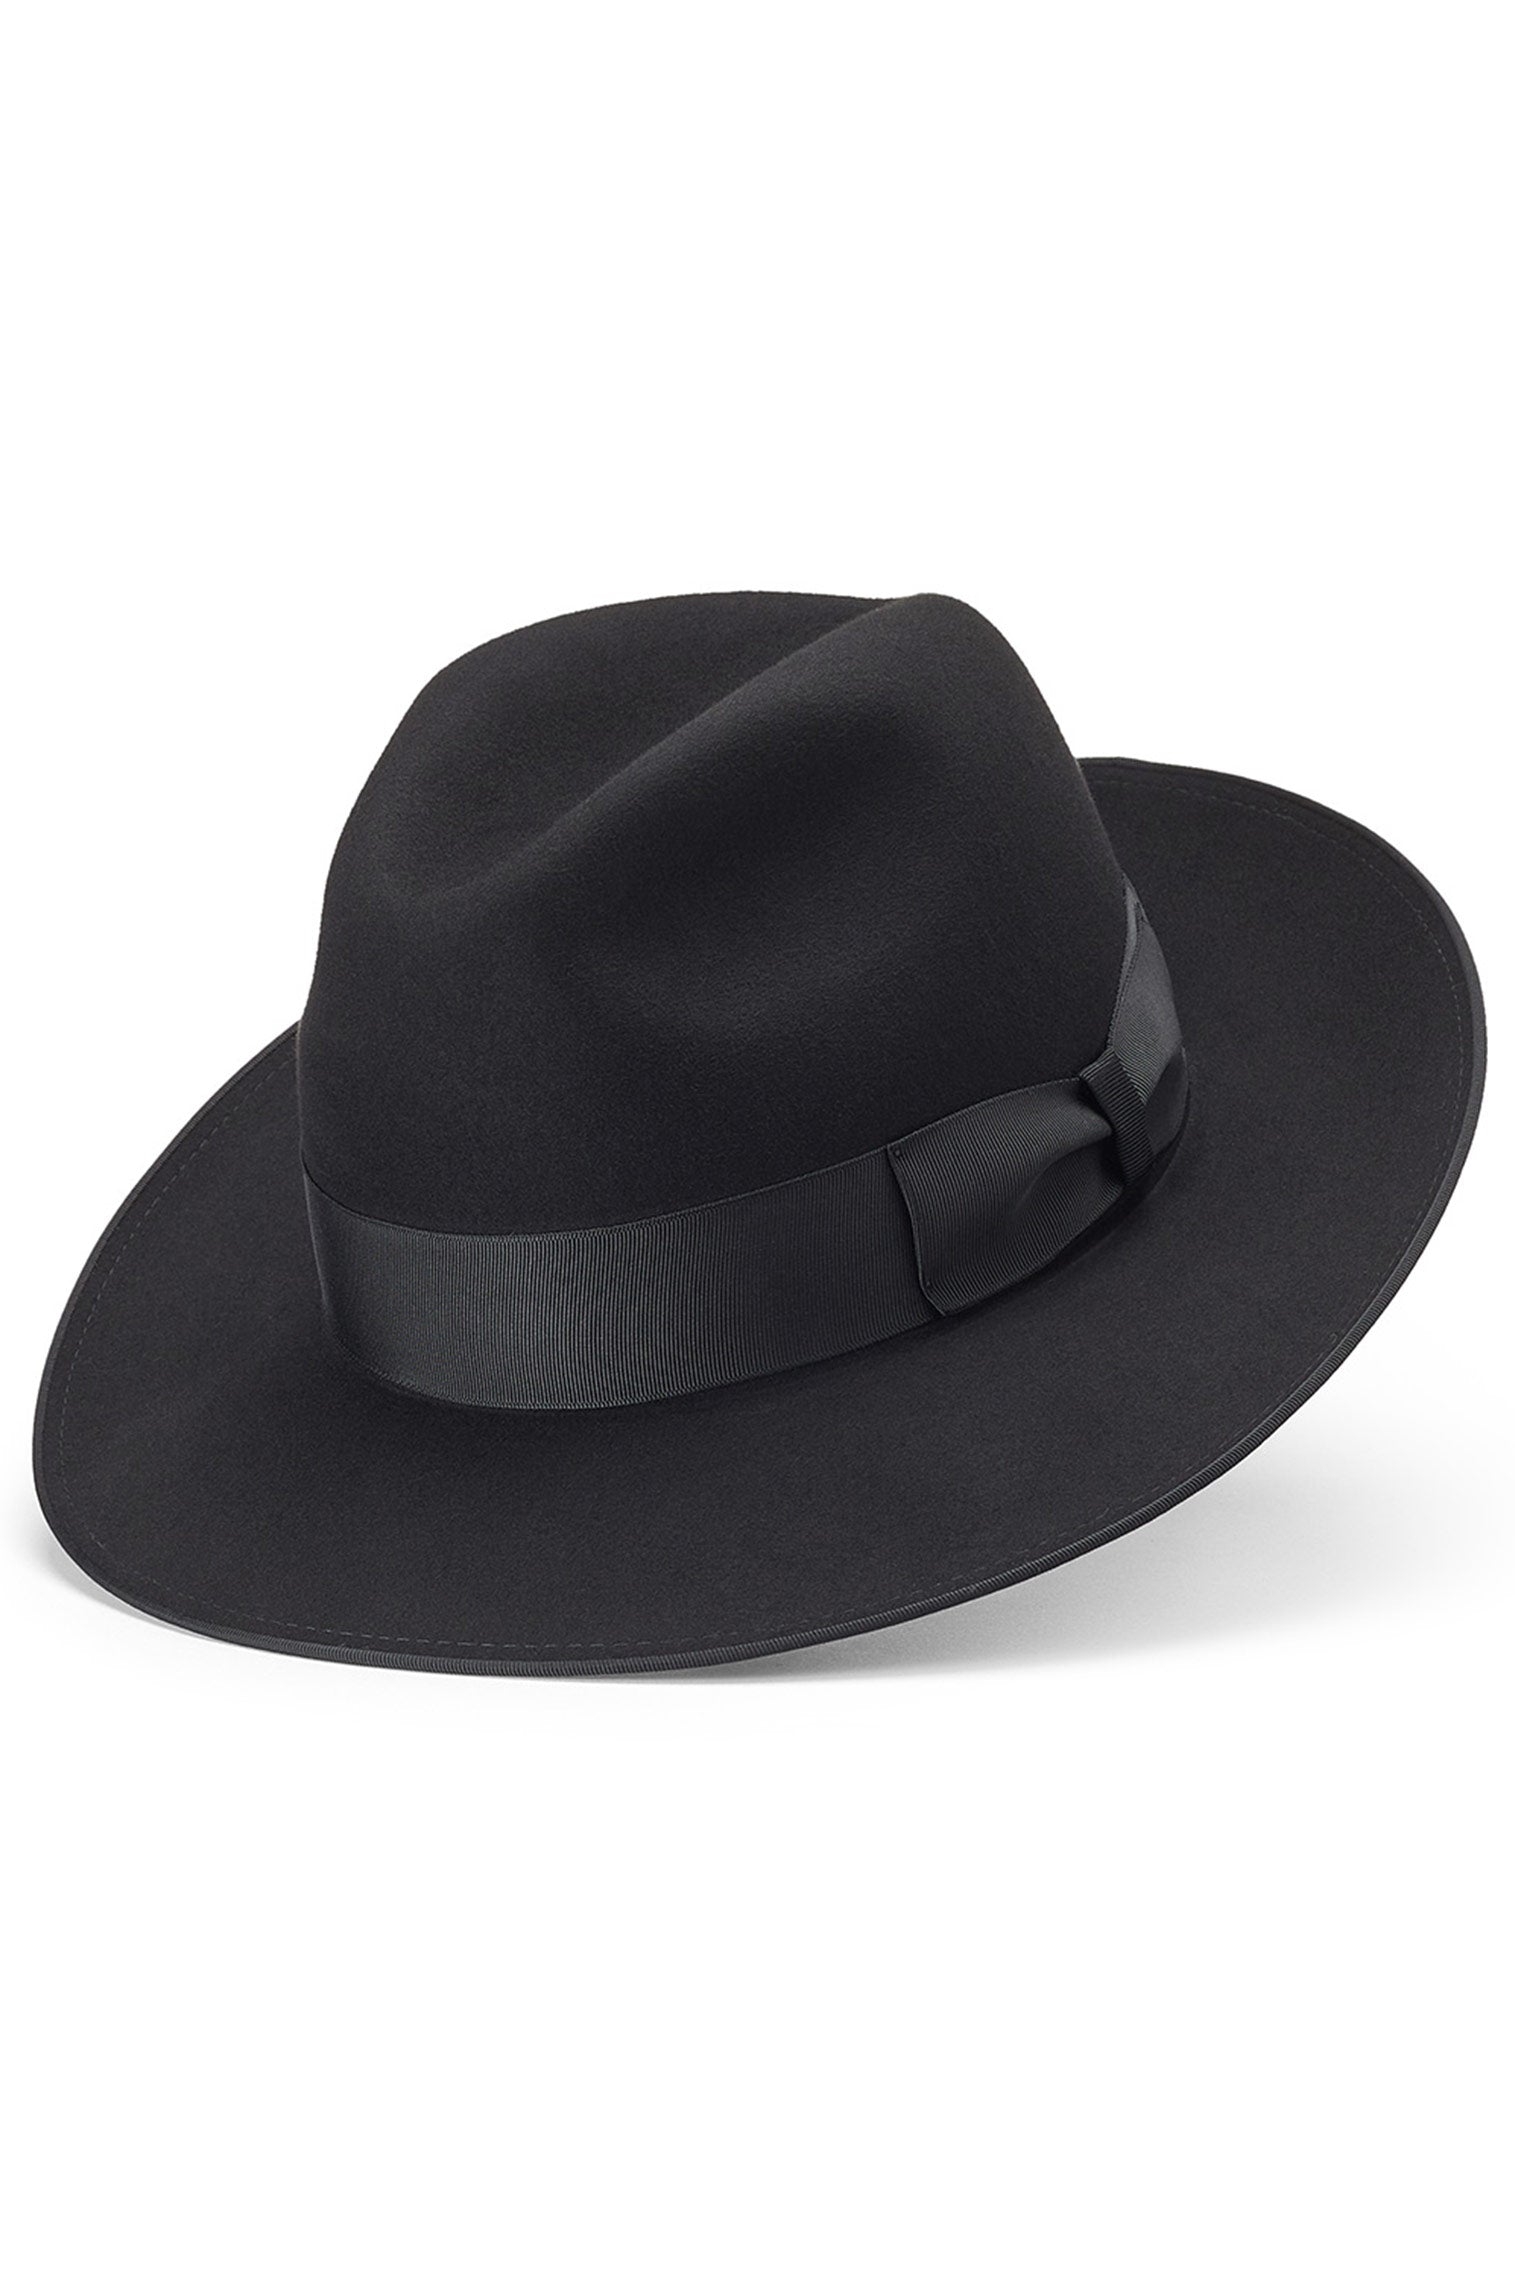 St James's Black Fedora - Father's Day Gift Guide - Lock & Co. Hatters London UK